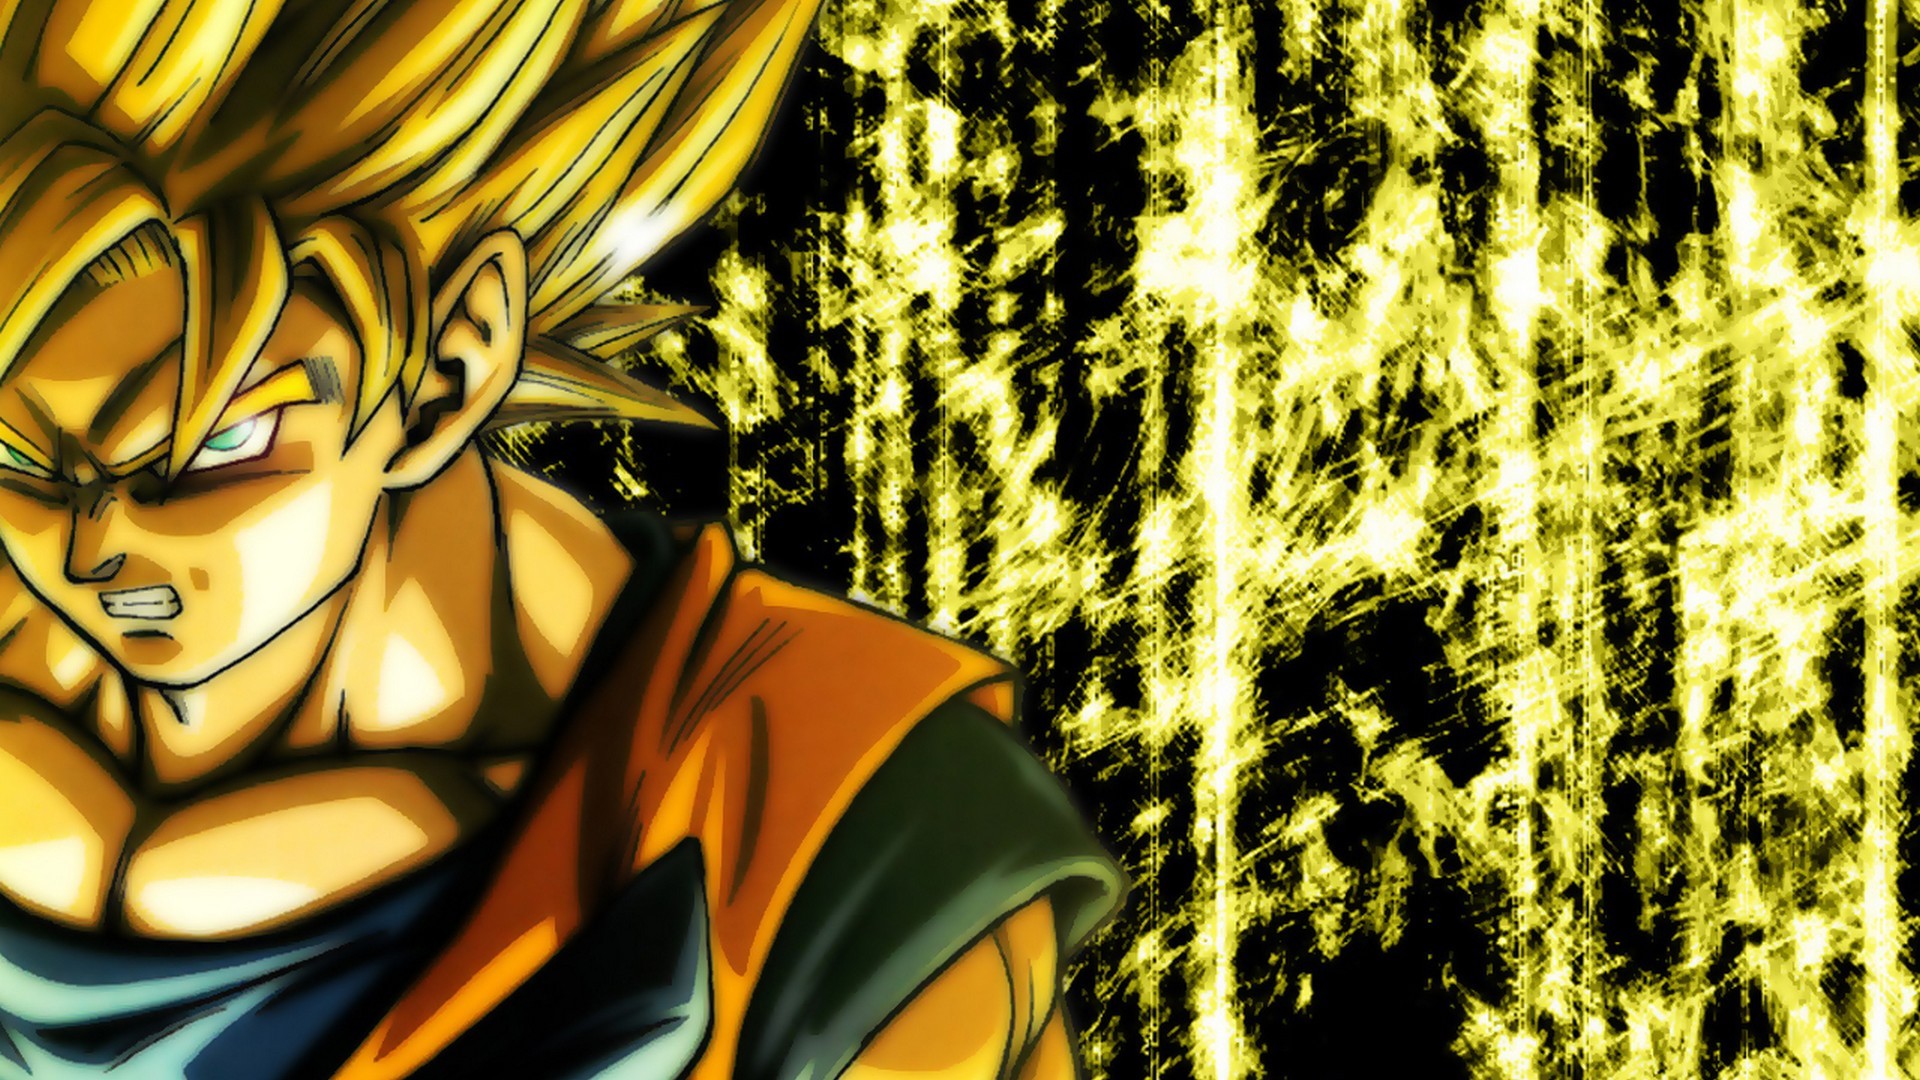 HD Goku Super Saiyan Backgrounds with image resolution 1920x1080 pixel. You can use this wallpaper as background for your desktop Computer Screensavers, Android or iPhone smartphones